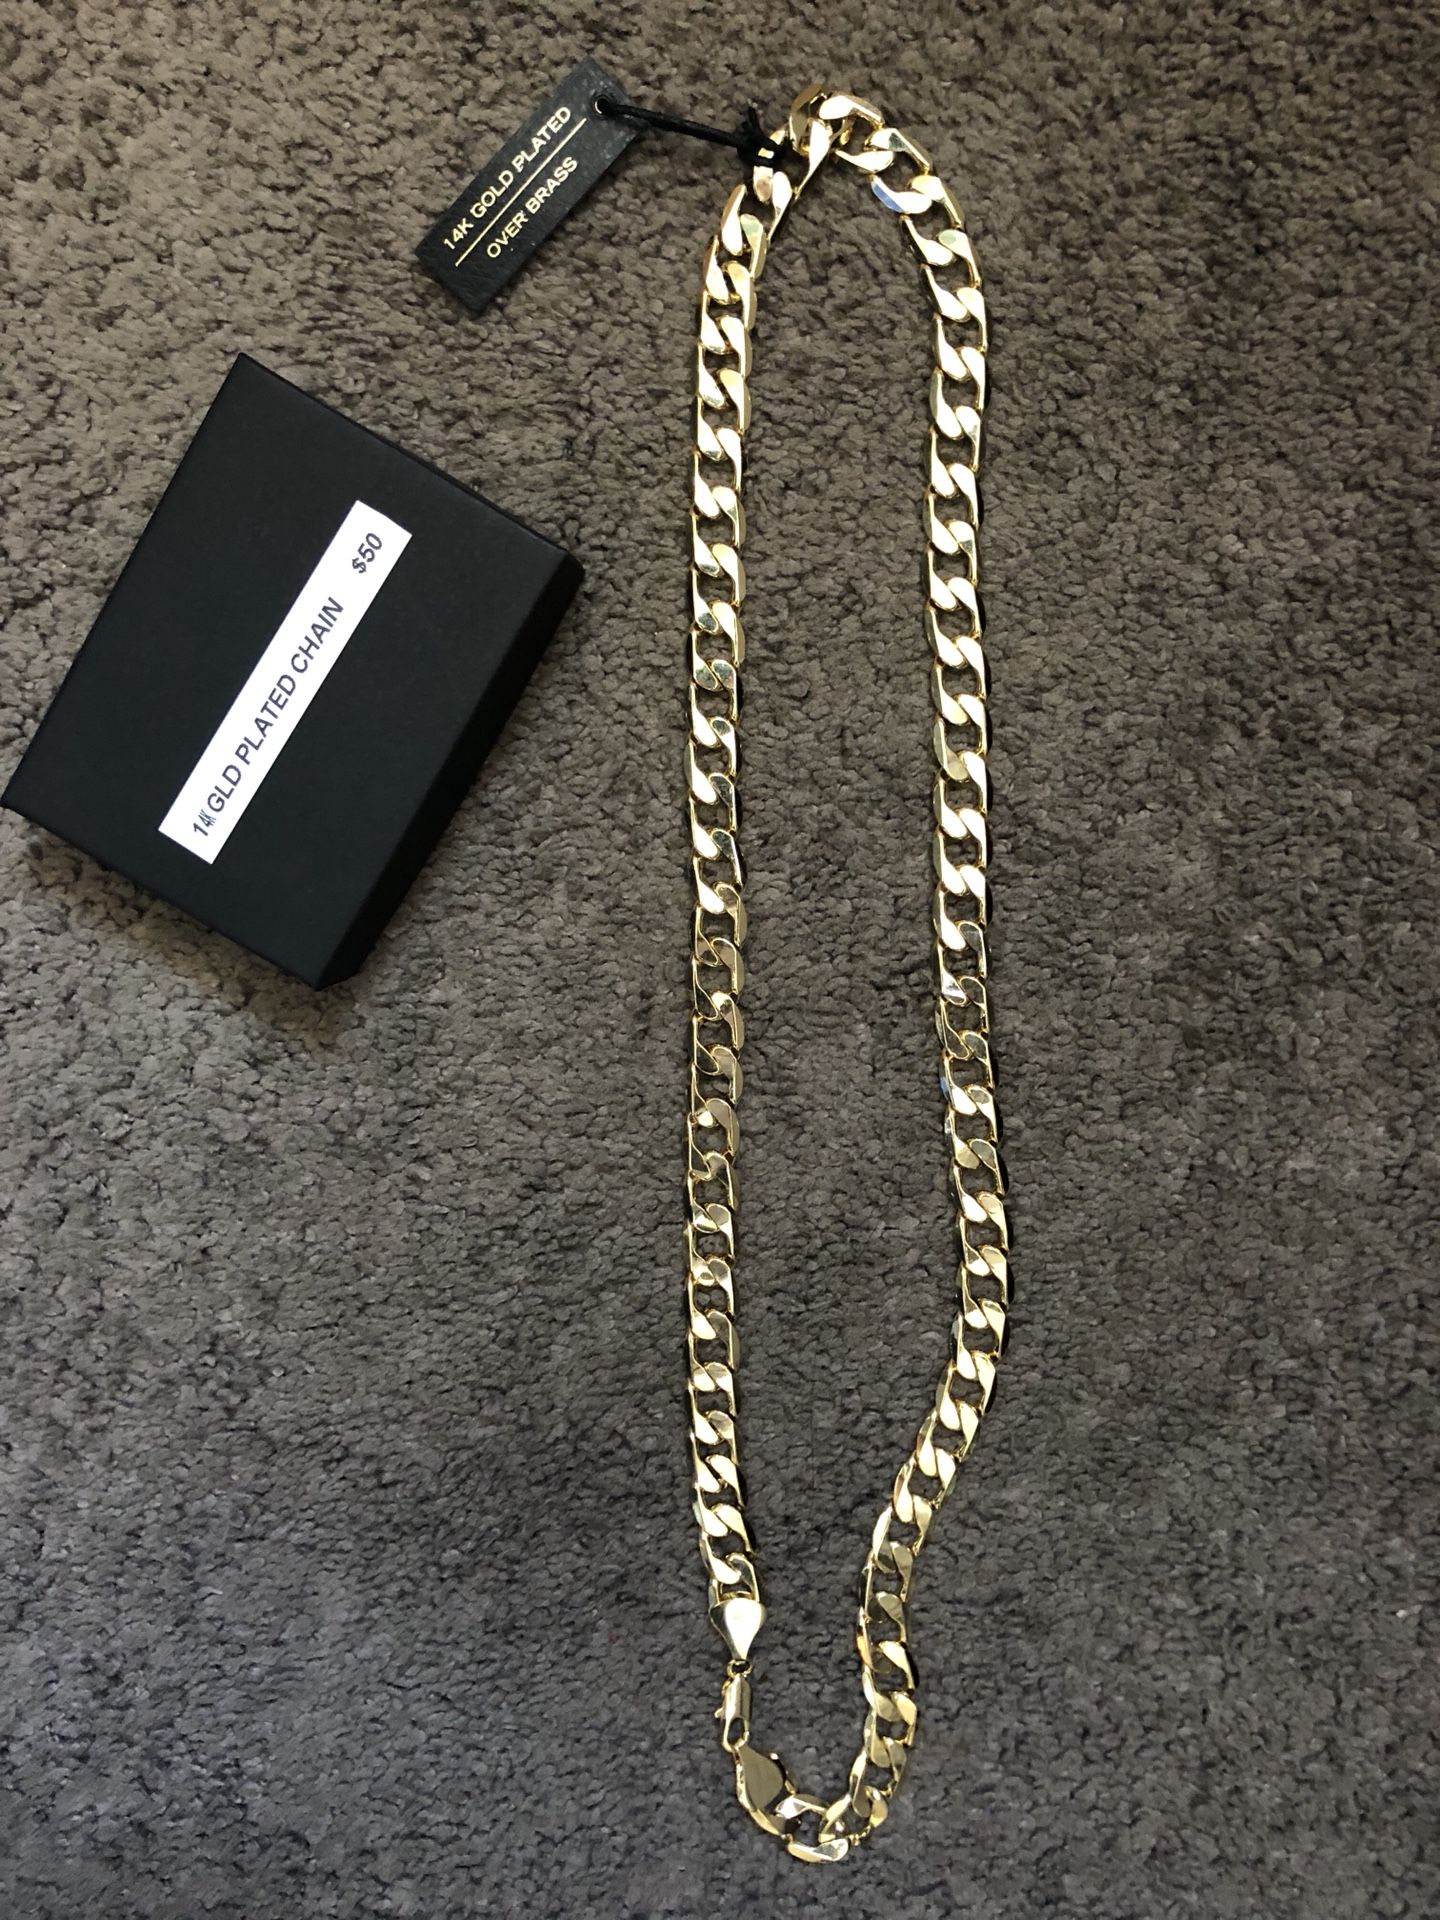 14K Gold Plated Chain